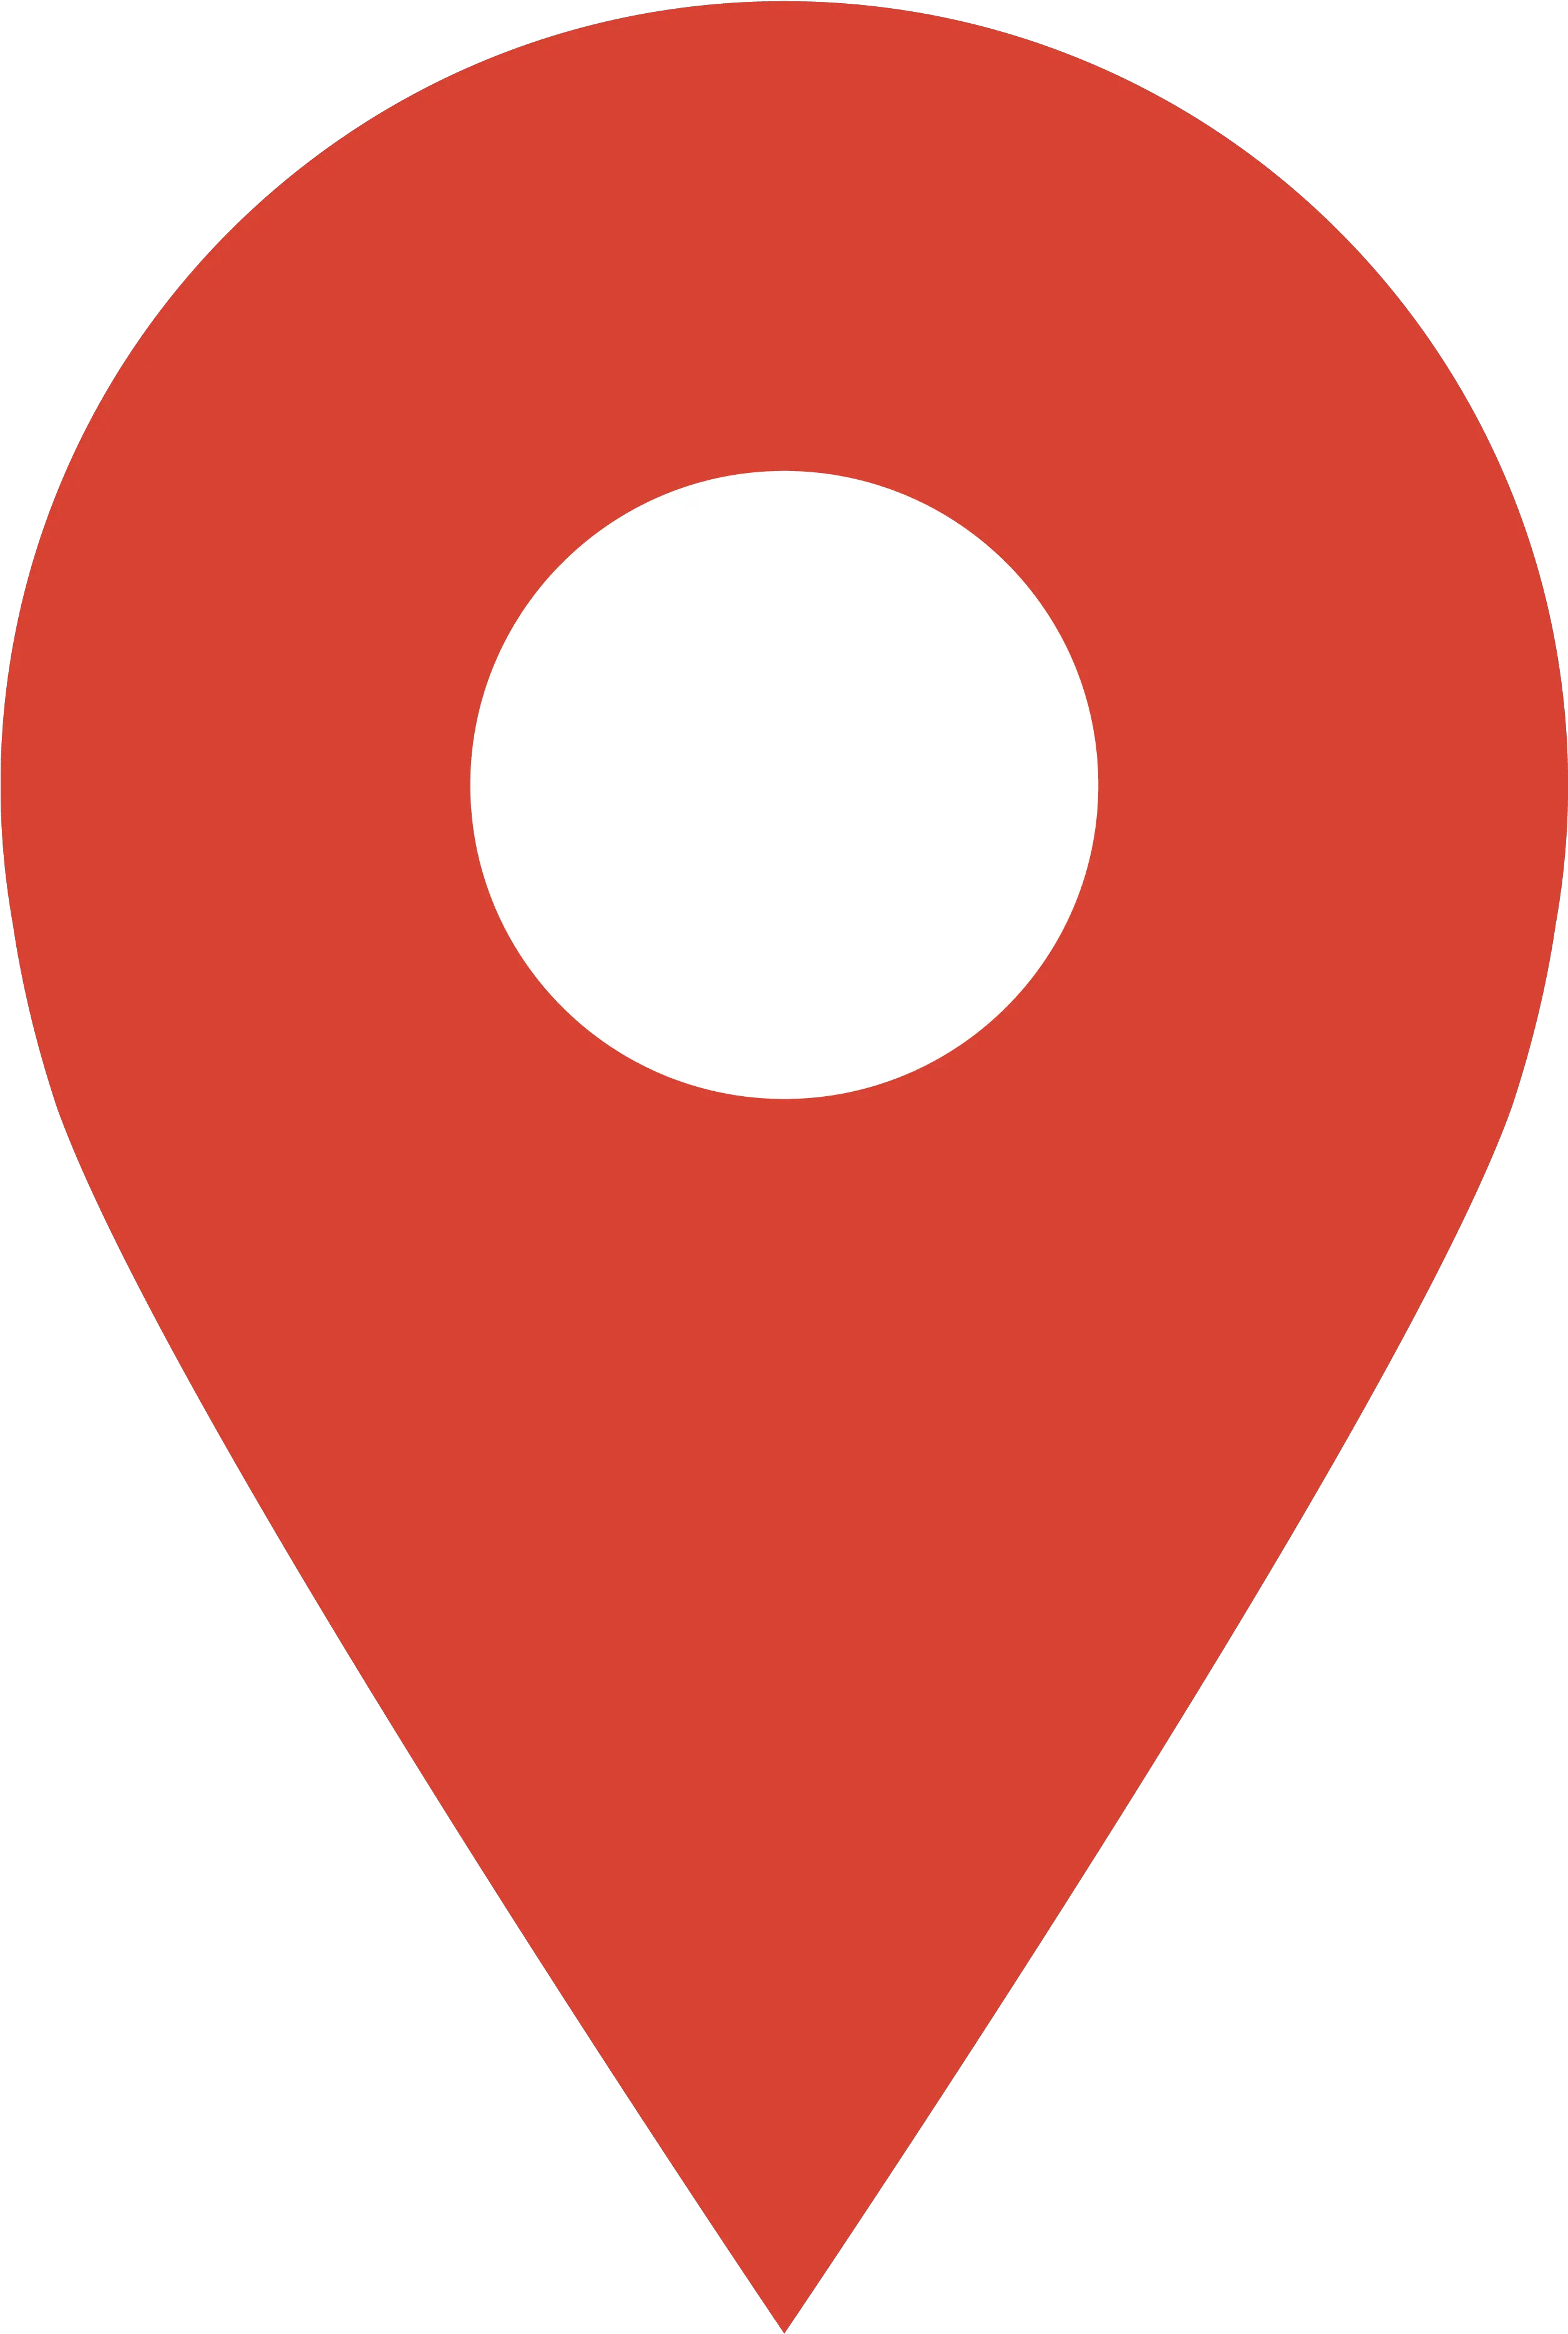 Airport Services Port Of South Louisiana Transparent Pin Location Png Airport Lounge Icon